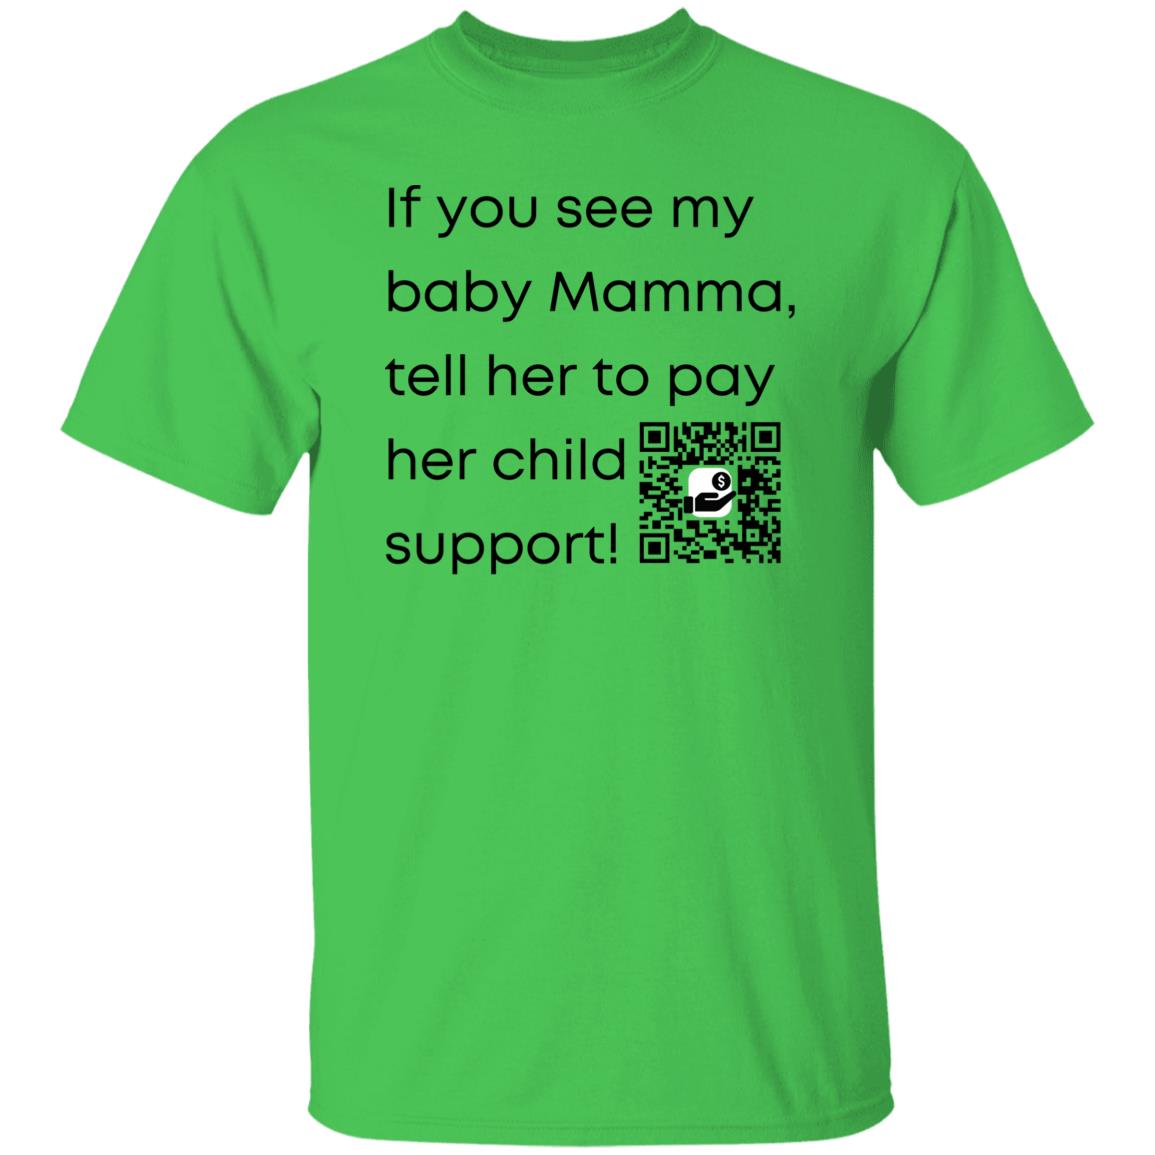 Pay Child Support (baby mamma) G500 5.3 oz. T-Shirt